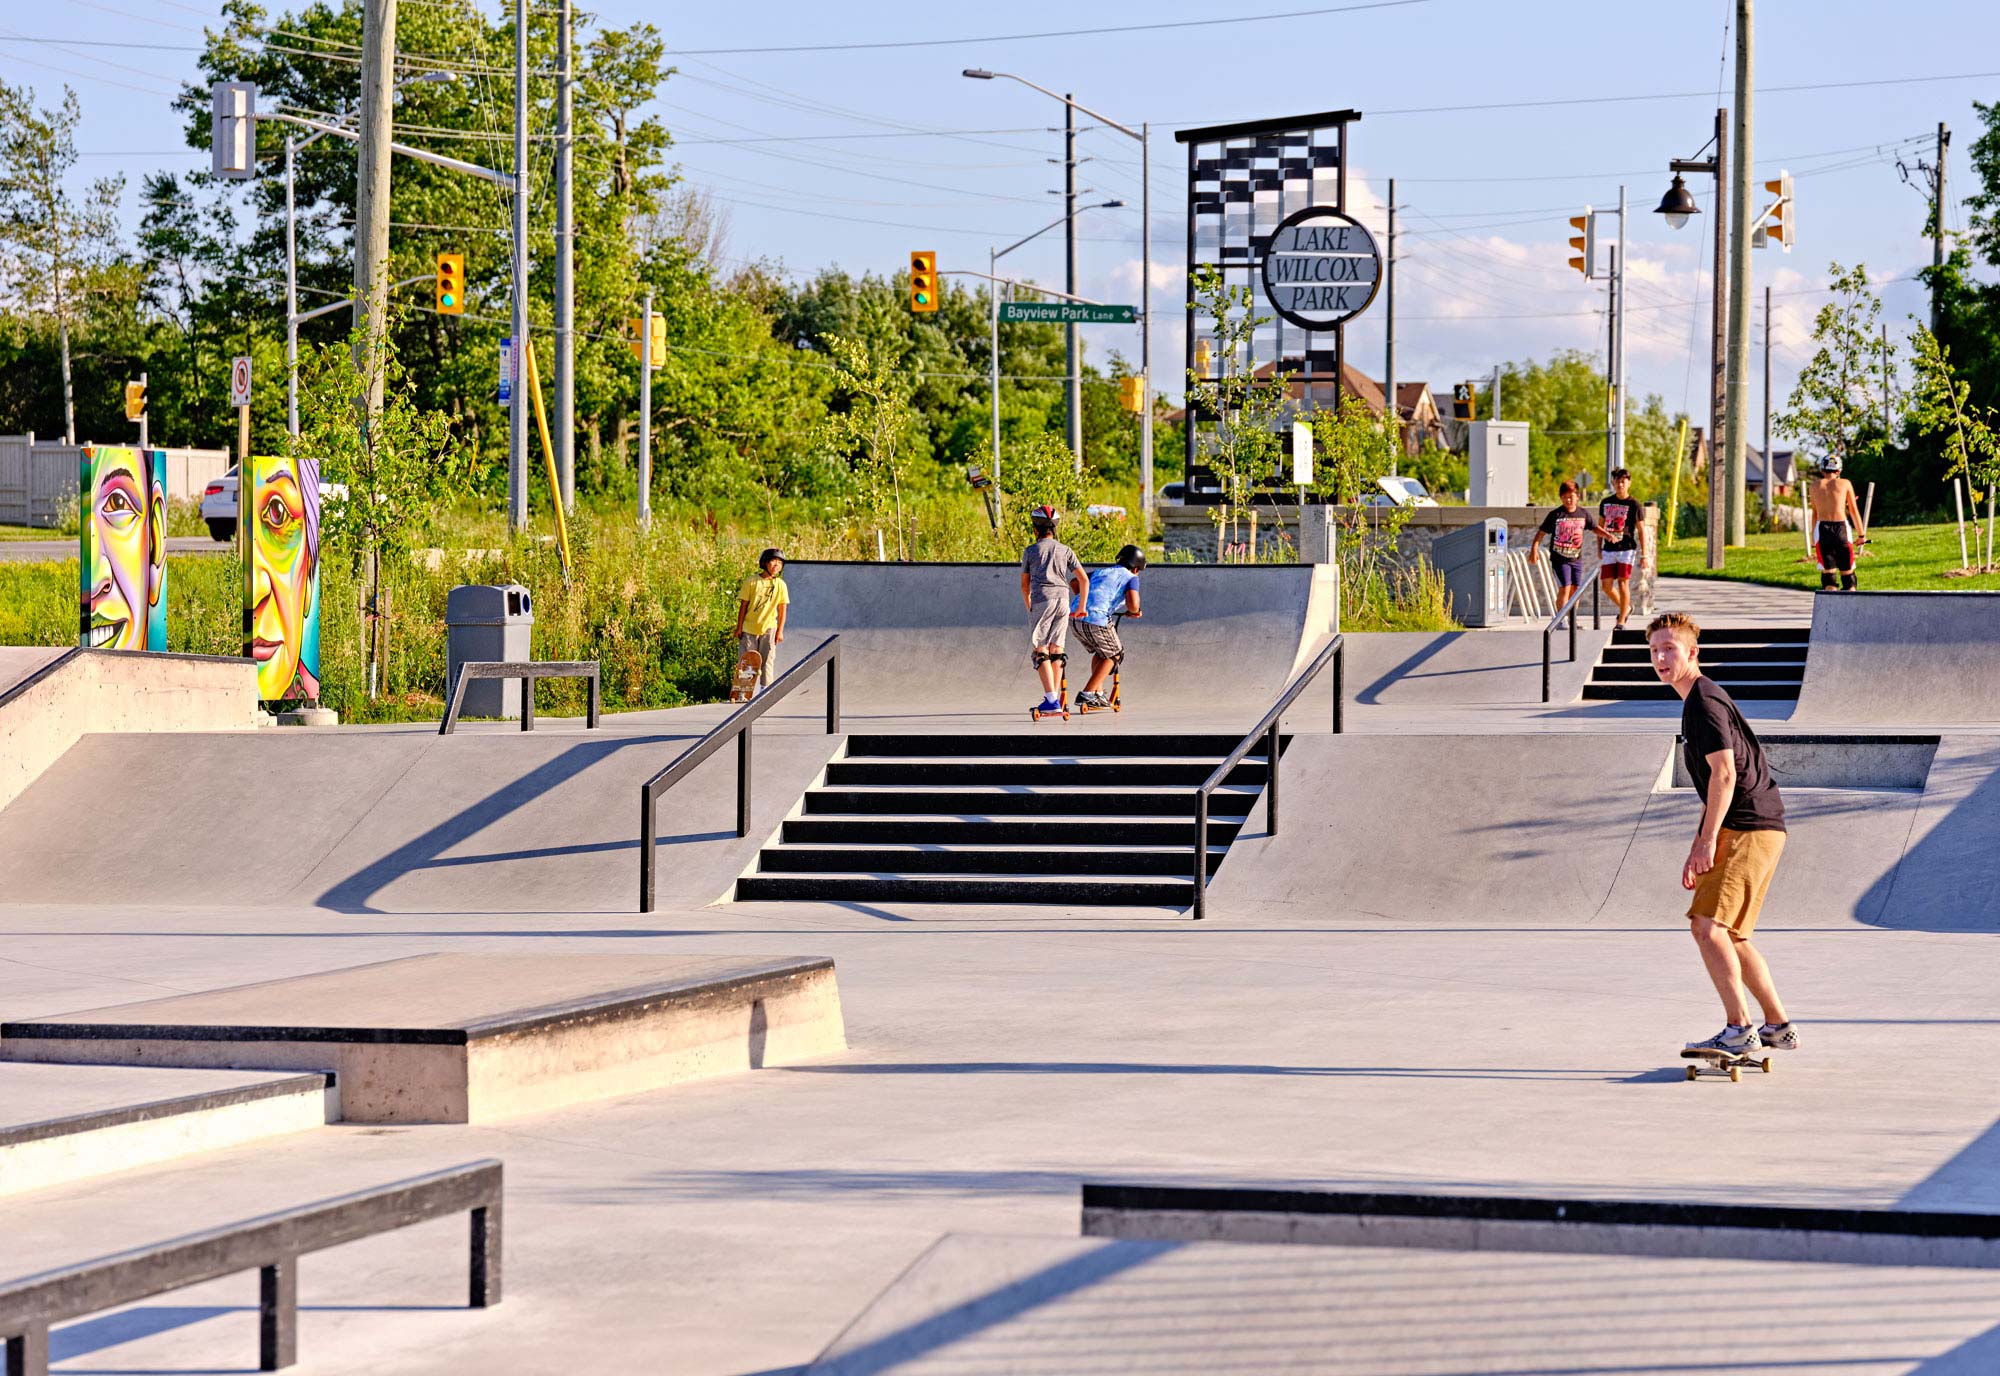 a group of people riding skateboards at a skate park.